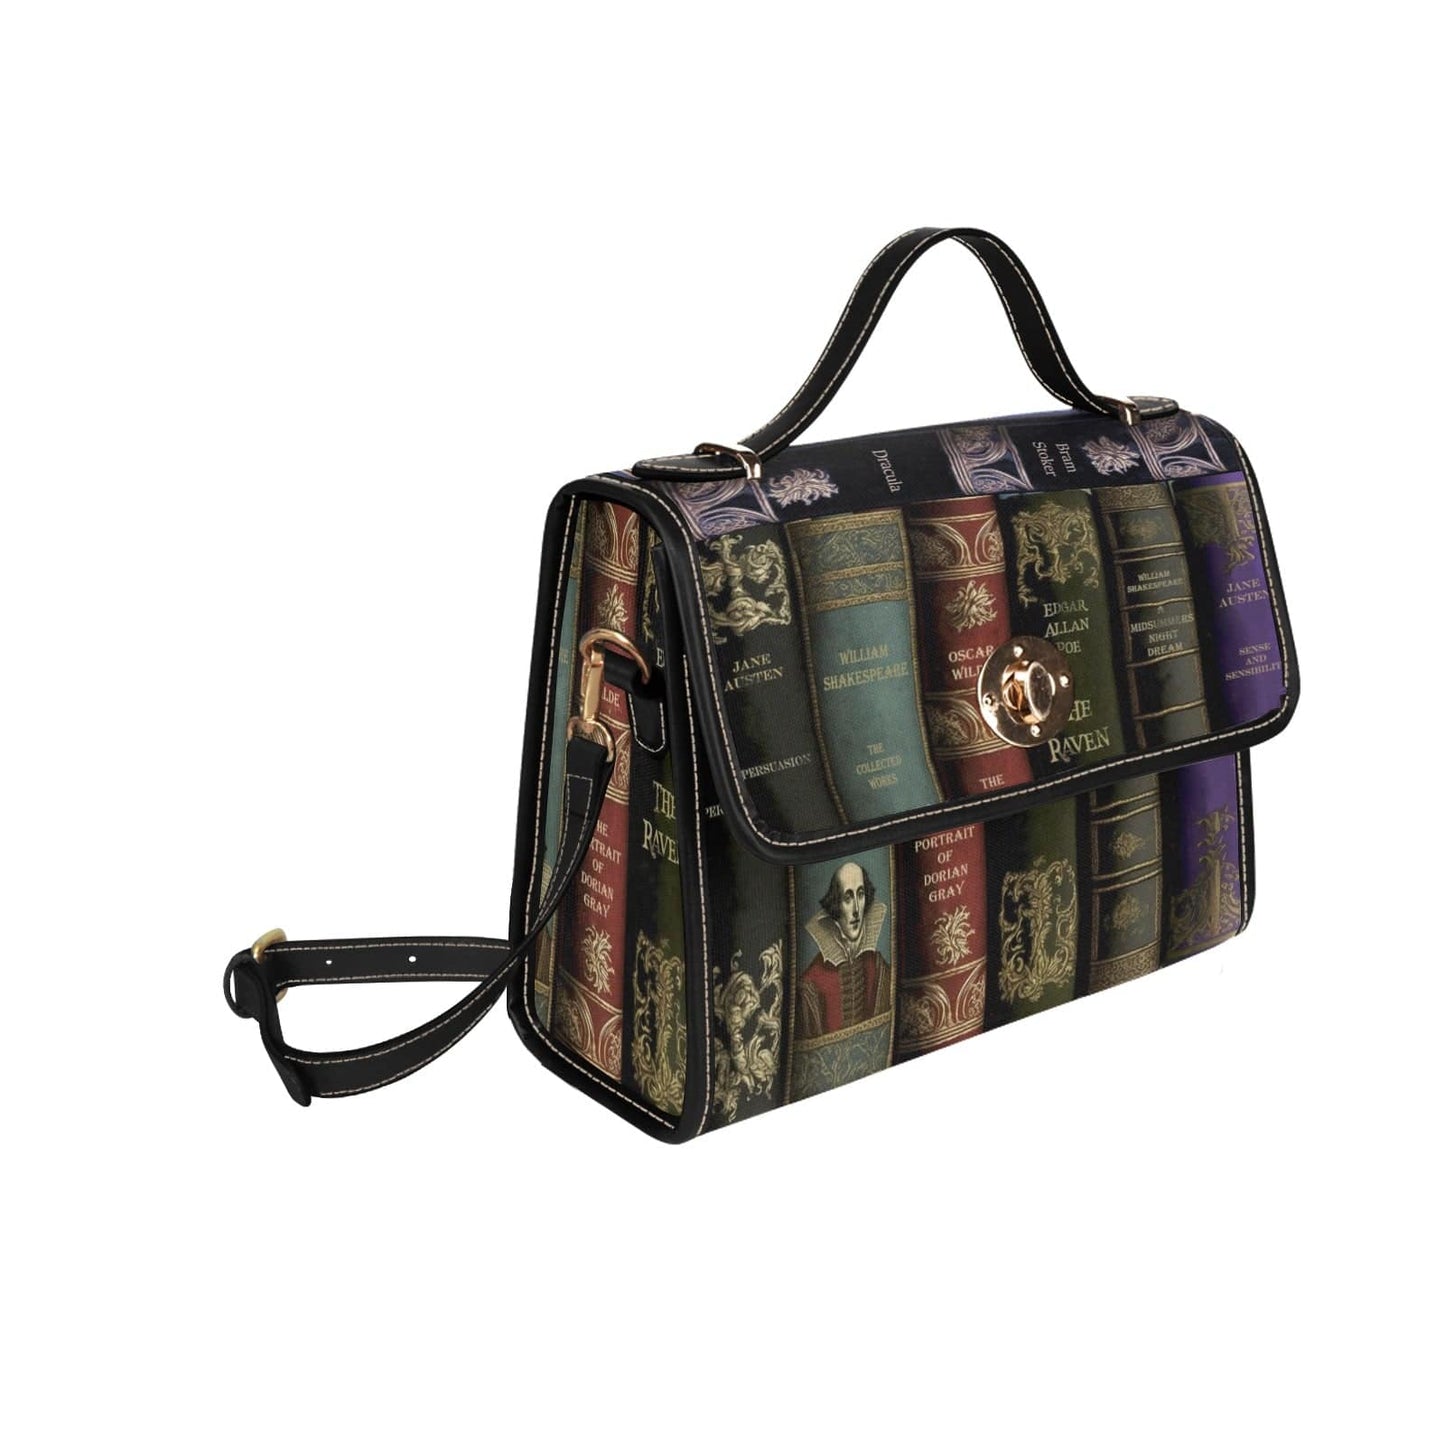 satchel handbag printed with spines of classic literature titles in dark colours, side view